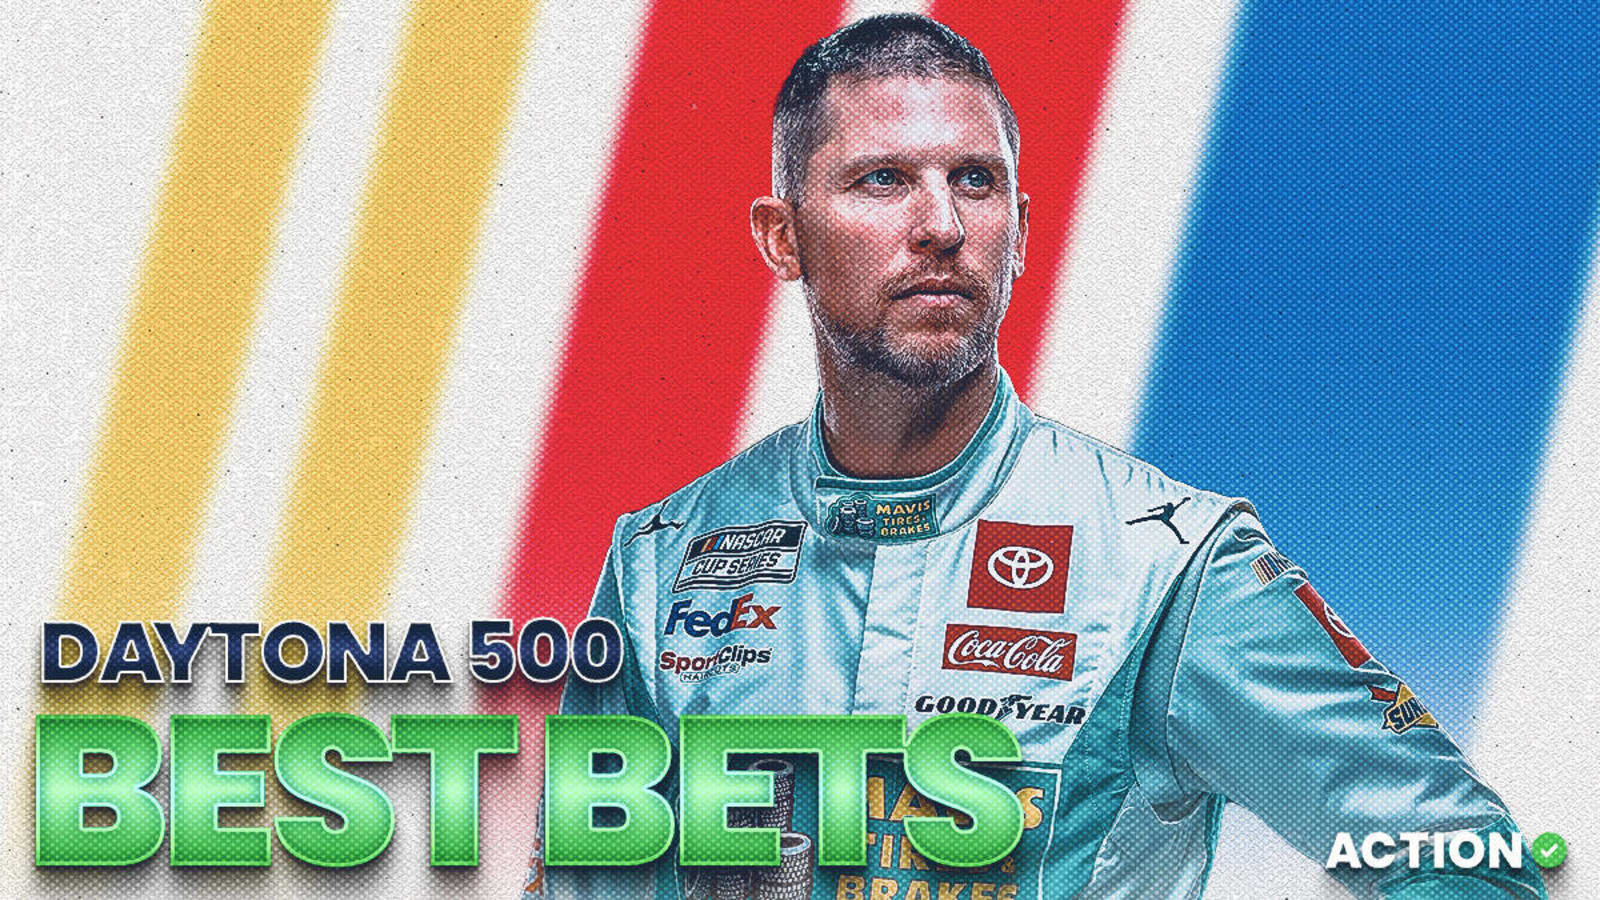 Daytona 500: NASCAR best bets from our racing experts for Monday, Feb. 19